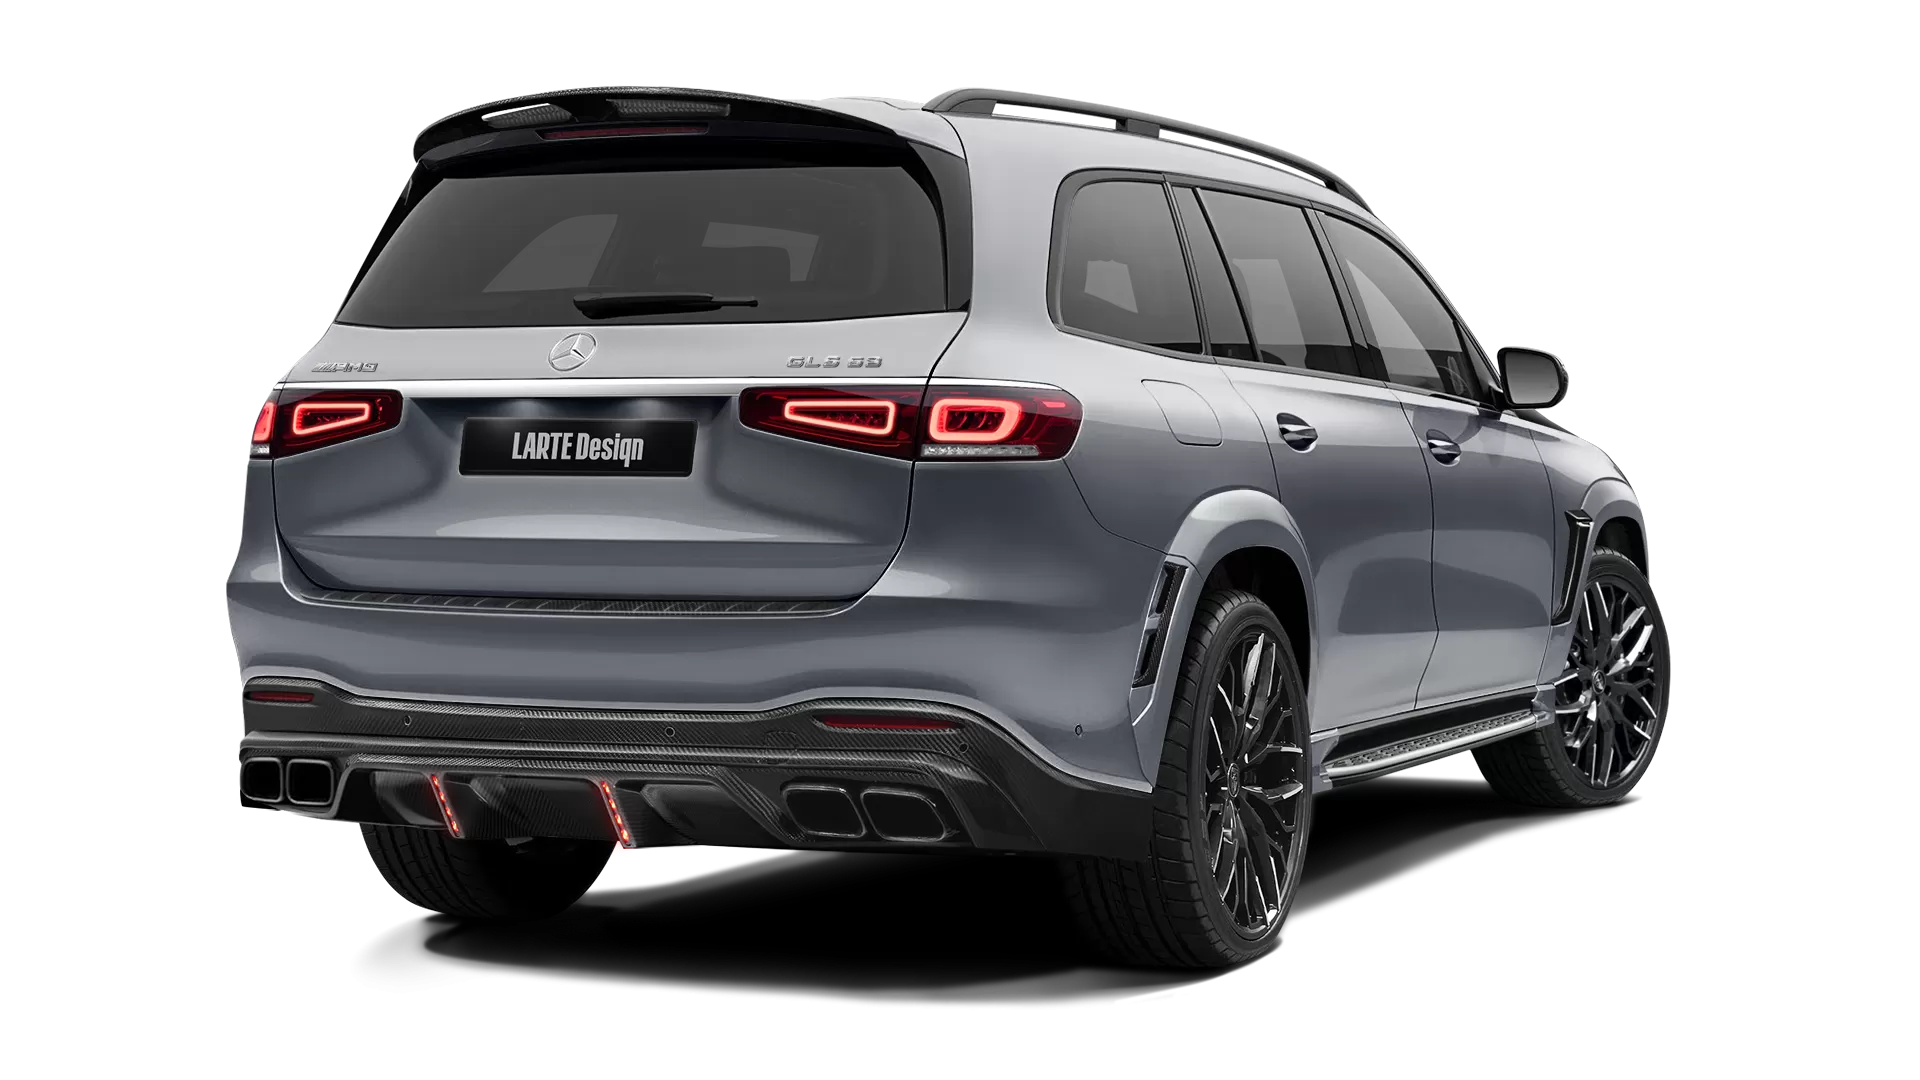 Mercedes GLS 63 AMG X167 with carbon body kit: back view shown in Selenite Grey